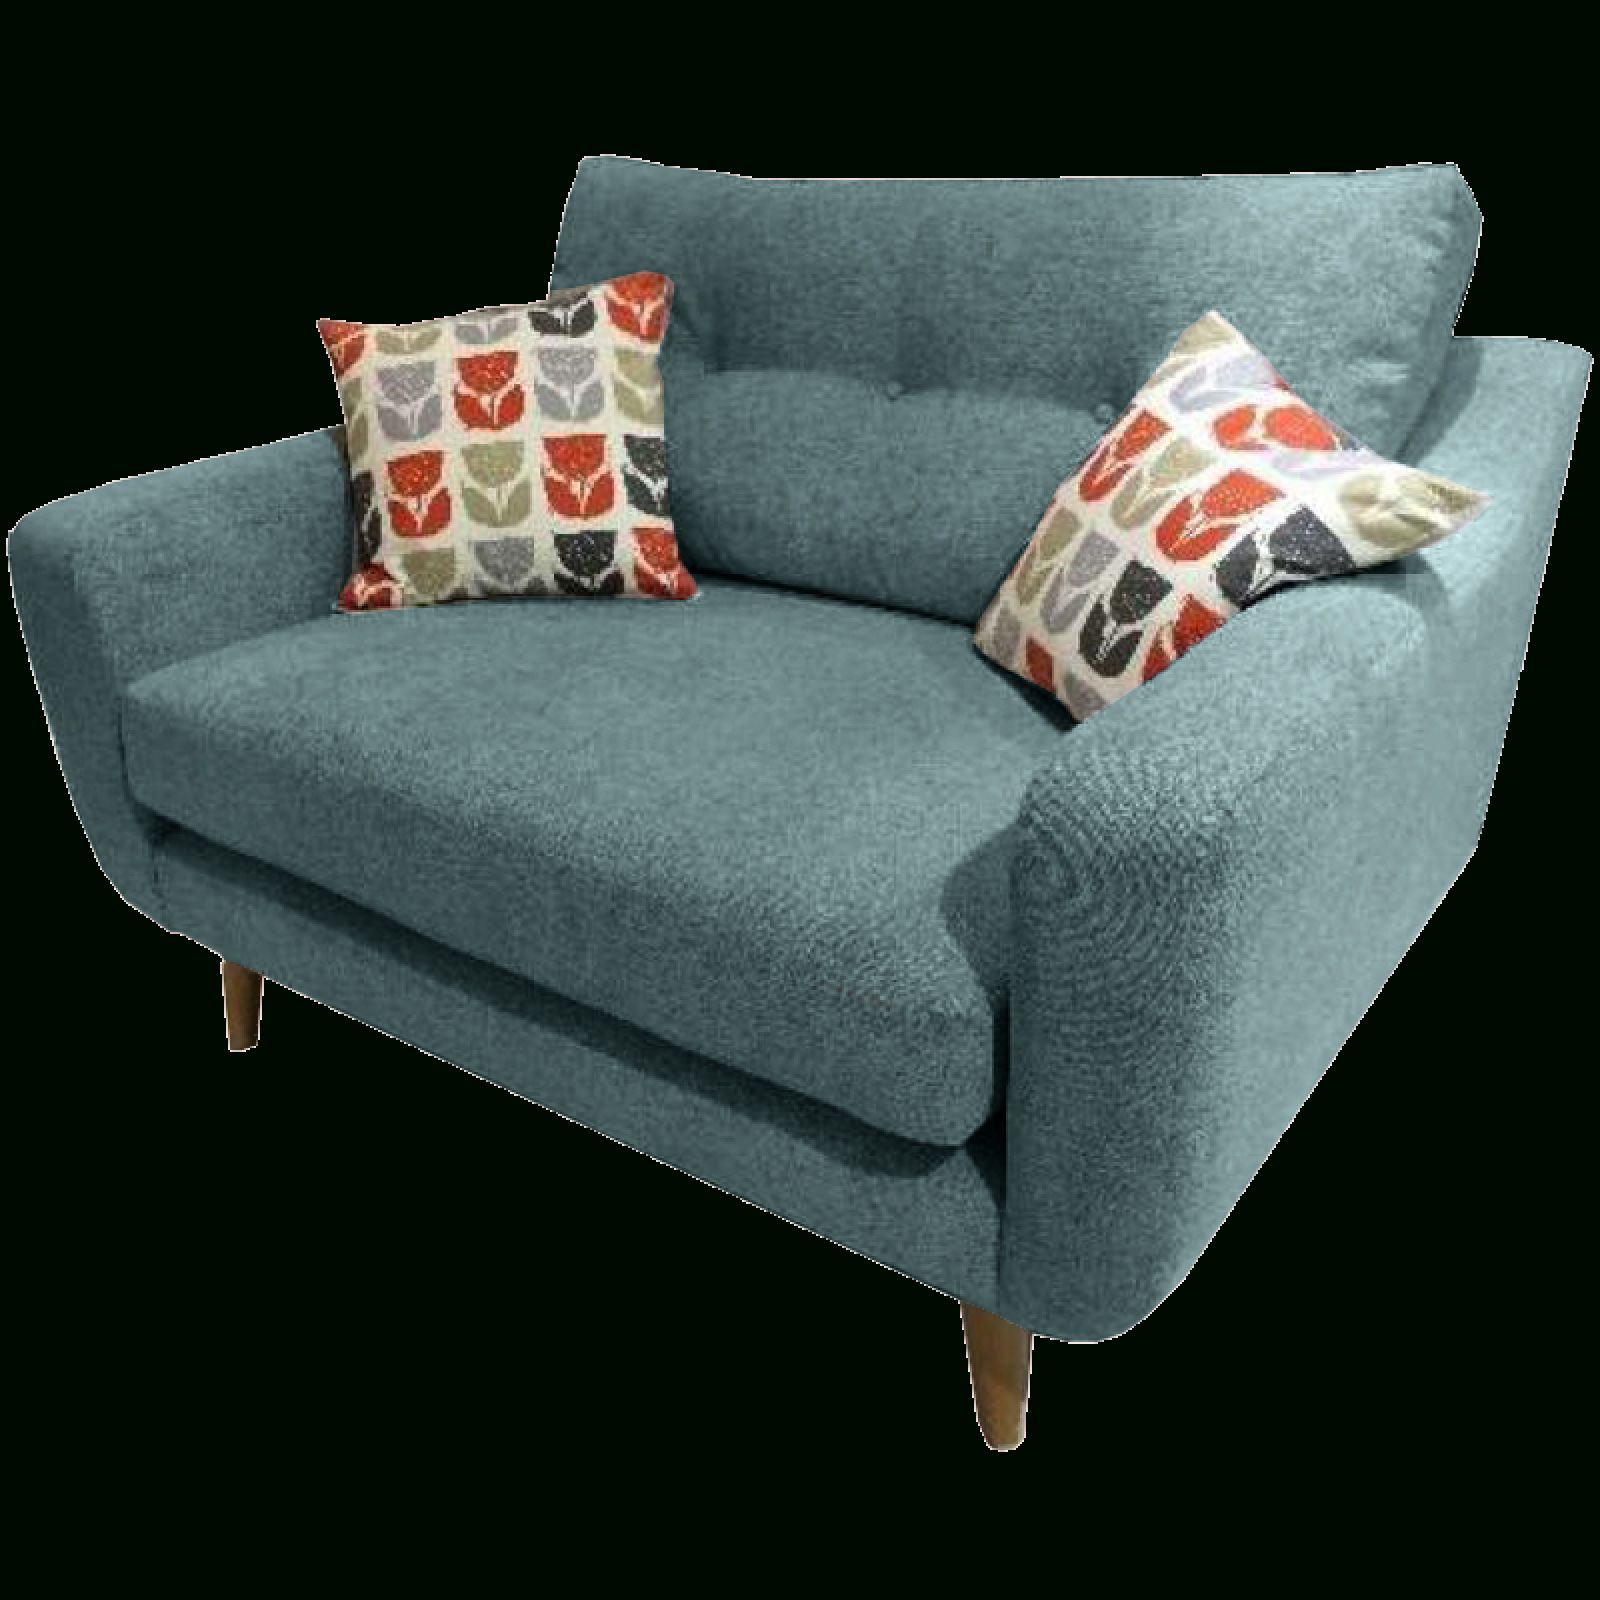 Lisbon Snuggler Sofa Chairwhitemeadow With 4pc French Seamed Sectional Sofas Oblong Mustard (Photo 5 of 15)